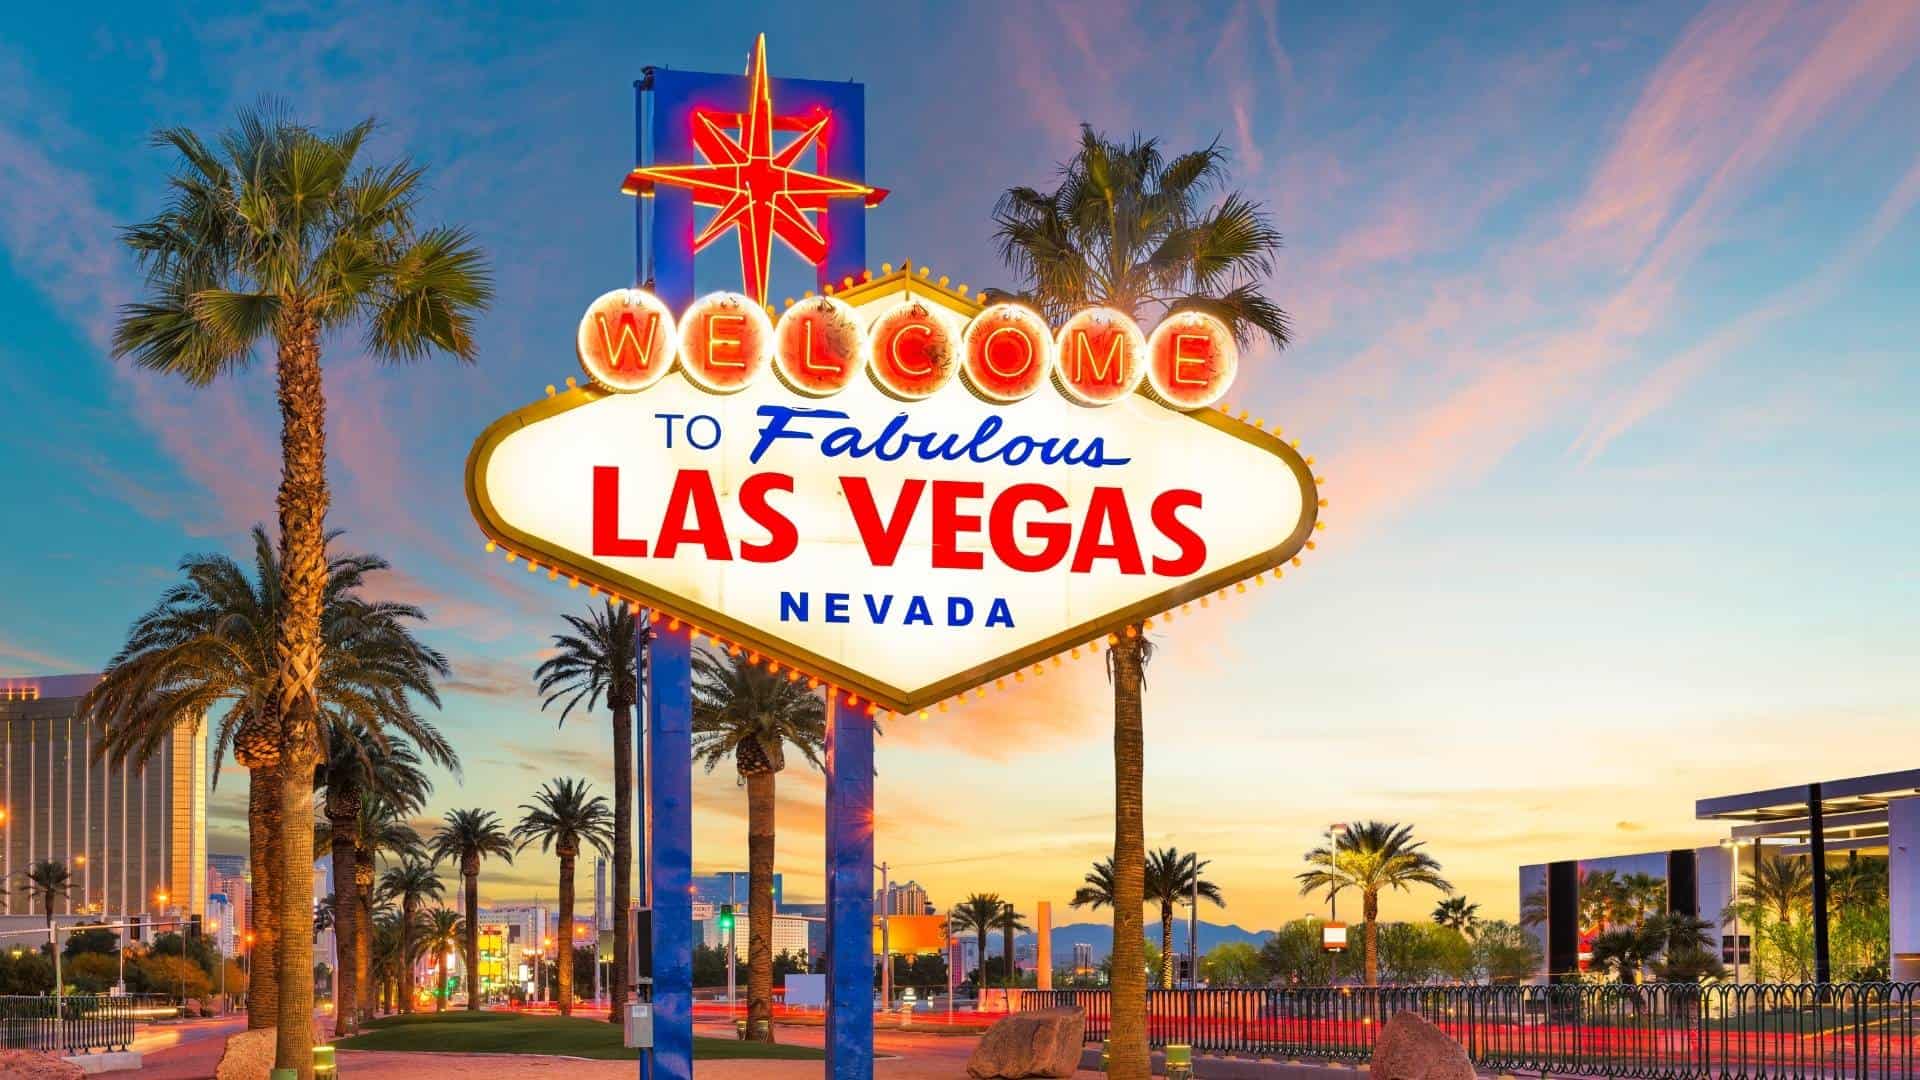 Uredelighed Byg op Indica 10 Fun Things to do in Las Vegas with Kids on a Family Vacation